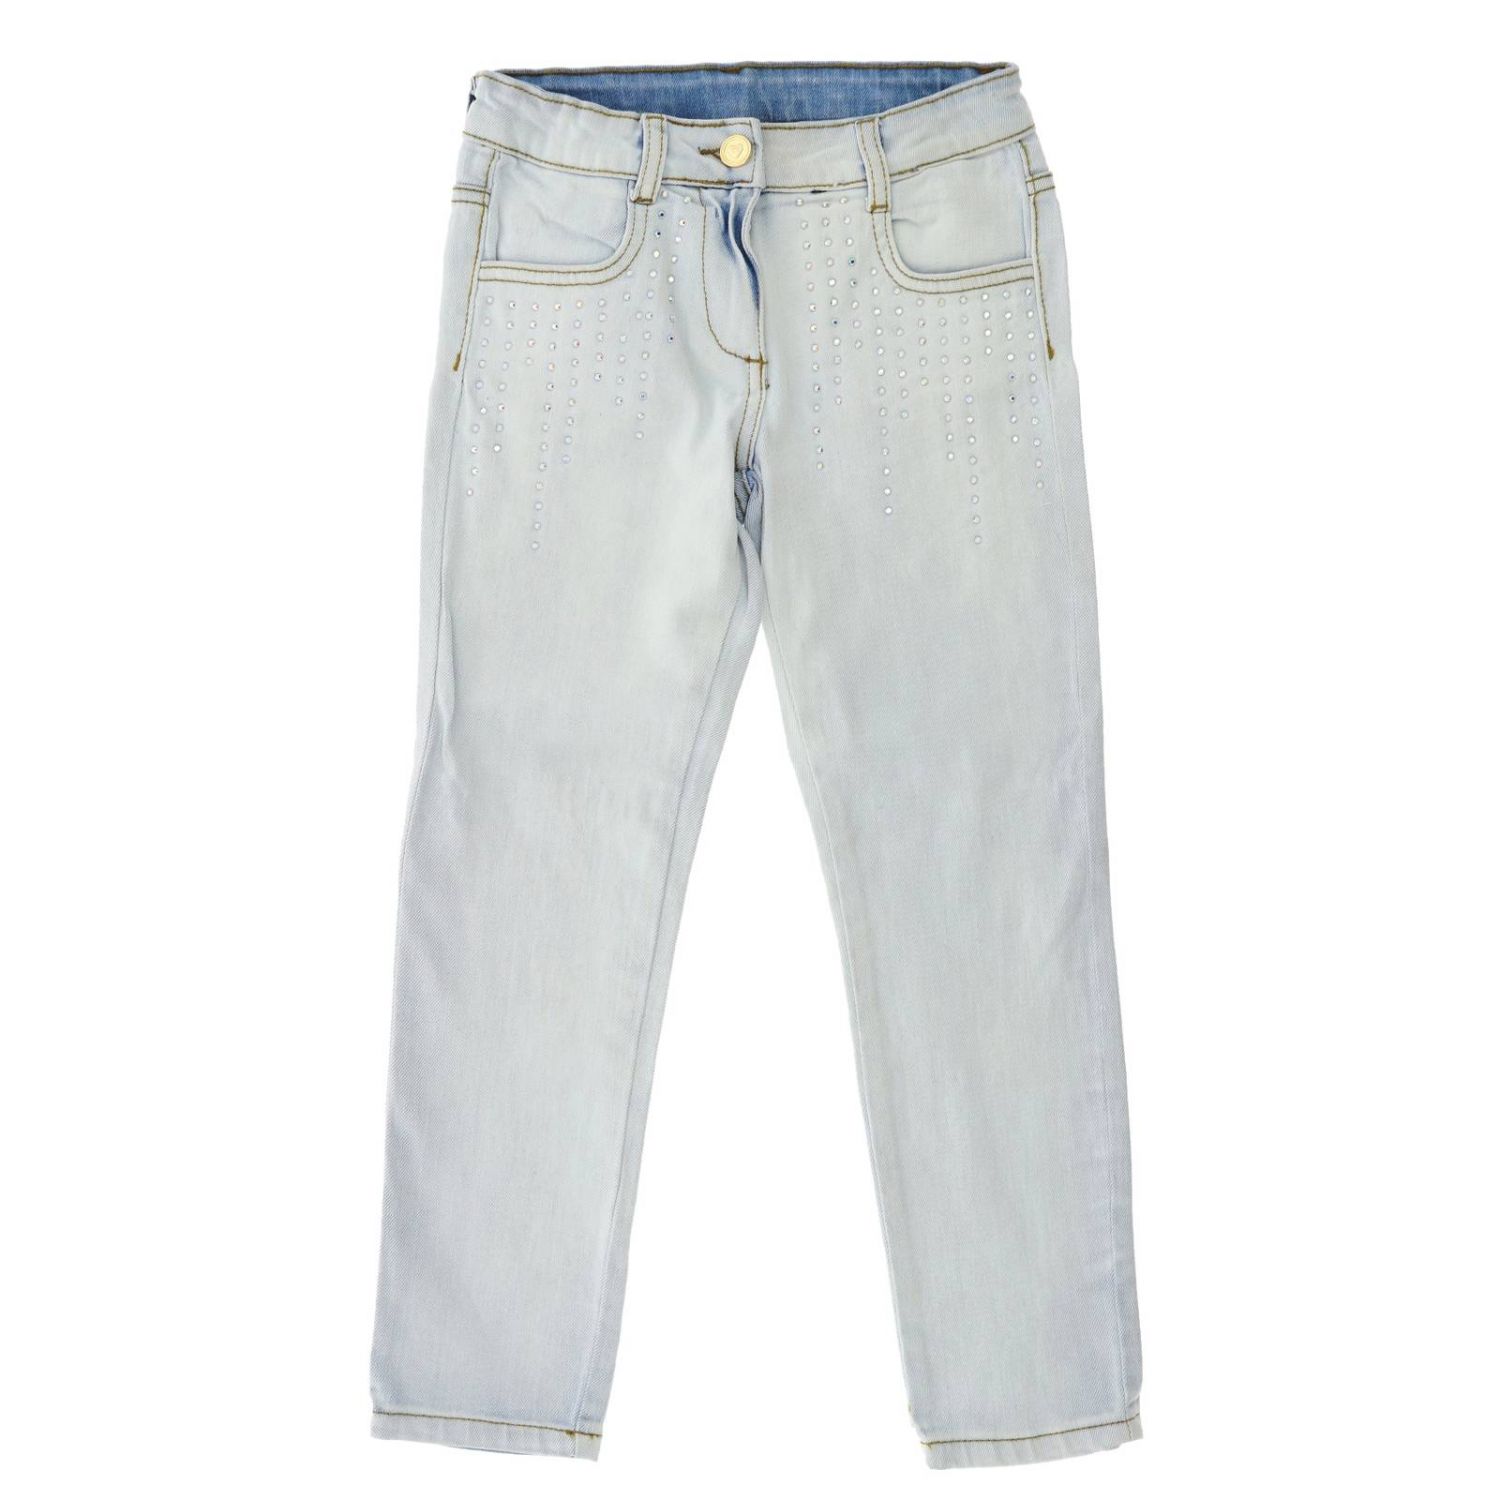 Twinset Outlet: jeans for girls - Stone Bleached | Twinset jeans ...